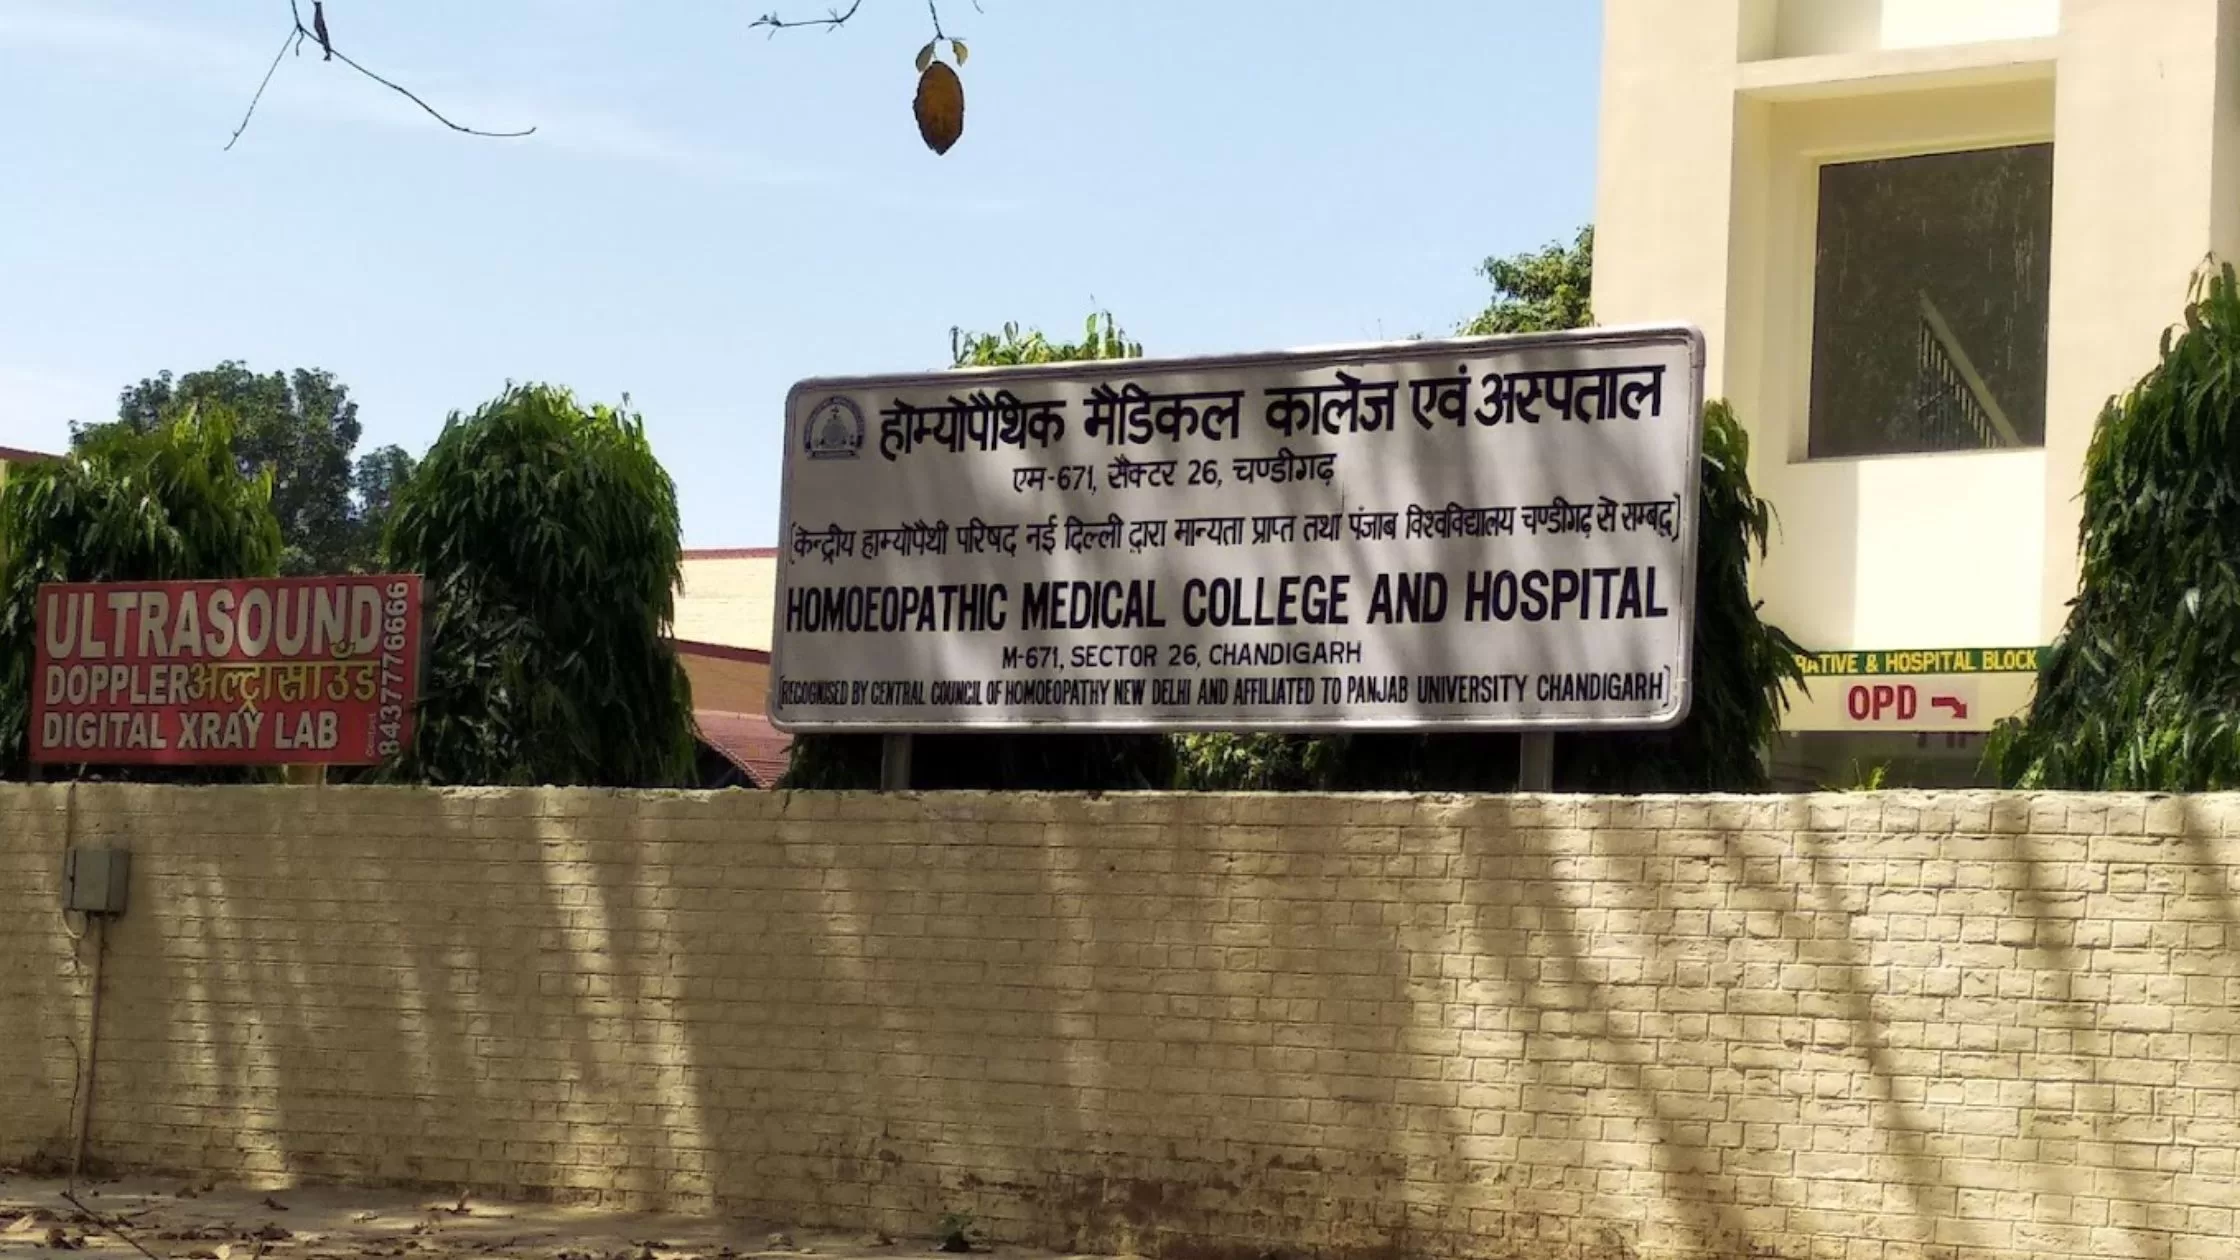 Outside view of Homeopathic Medical College and Hospital